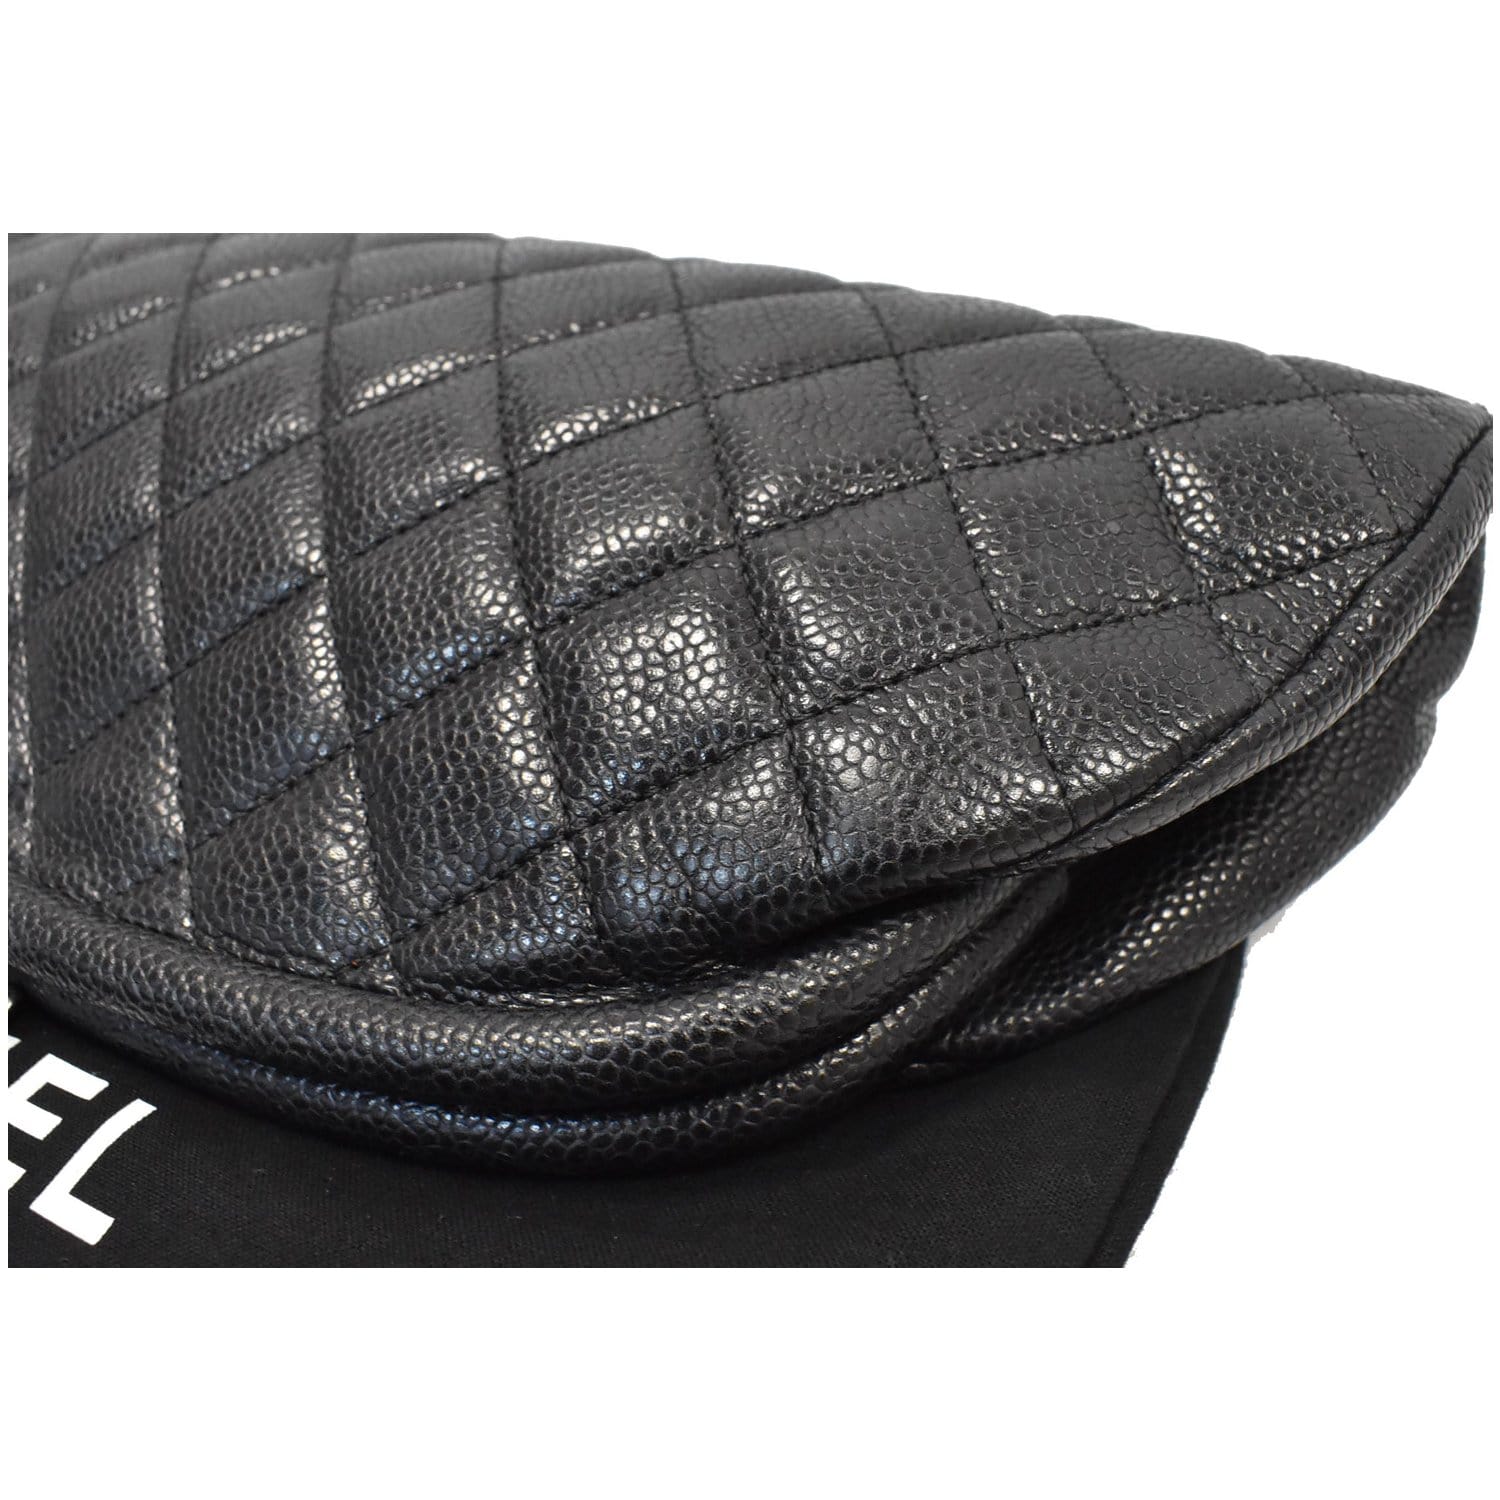 CHANEL Timeless Caviar Quilted Leather Clutch Black